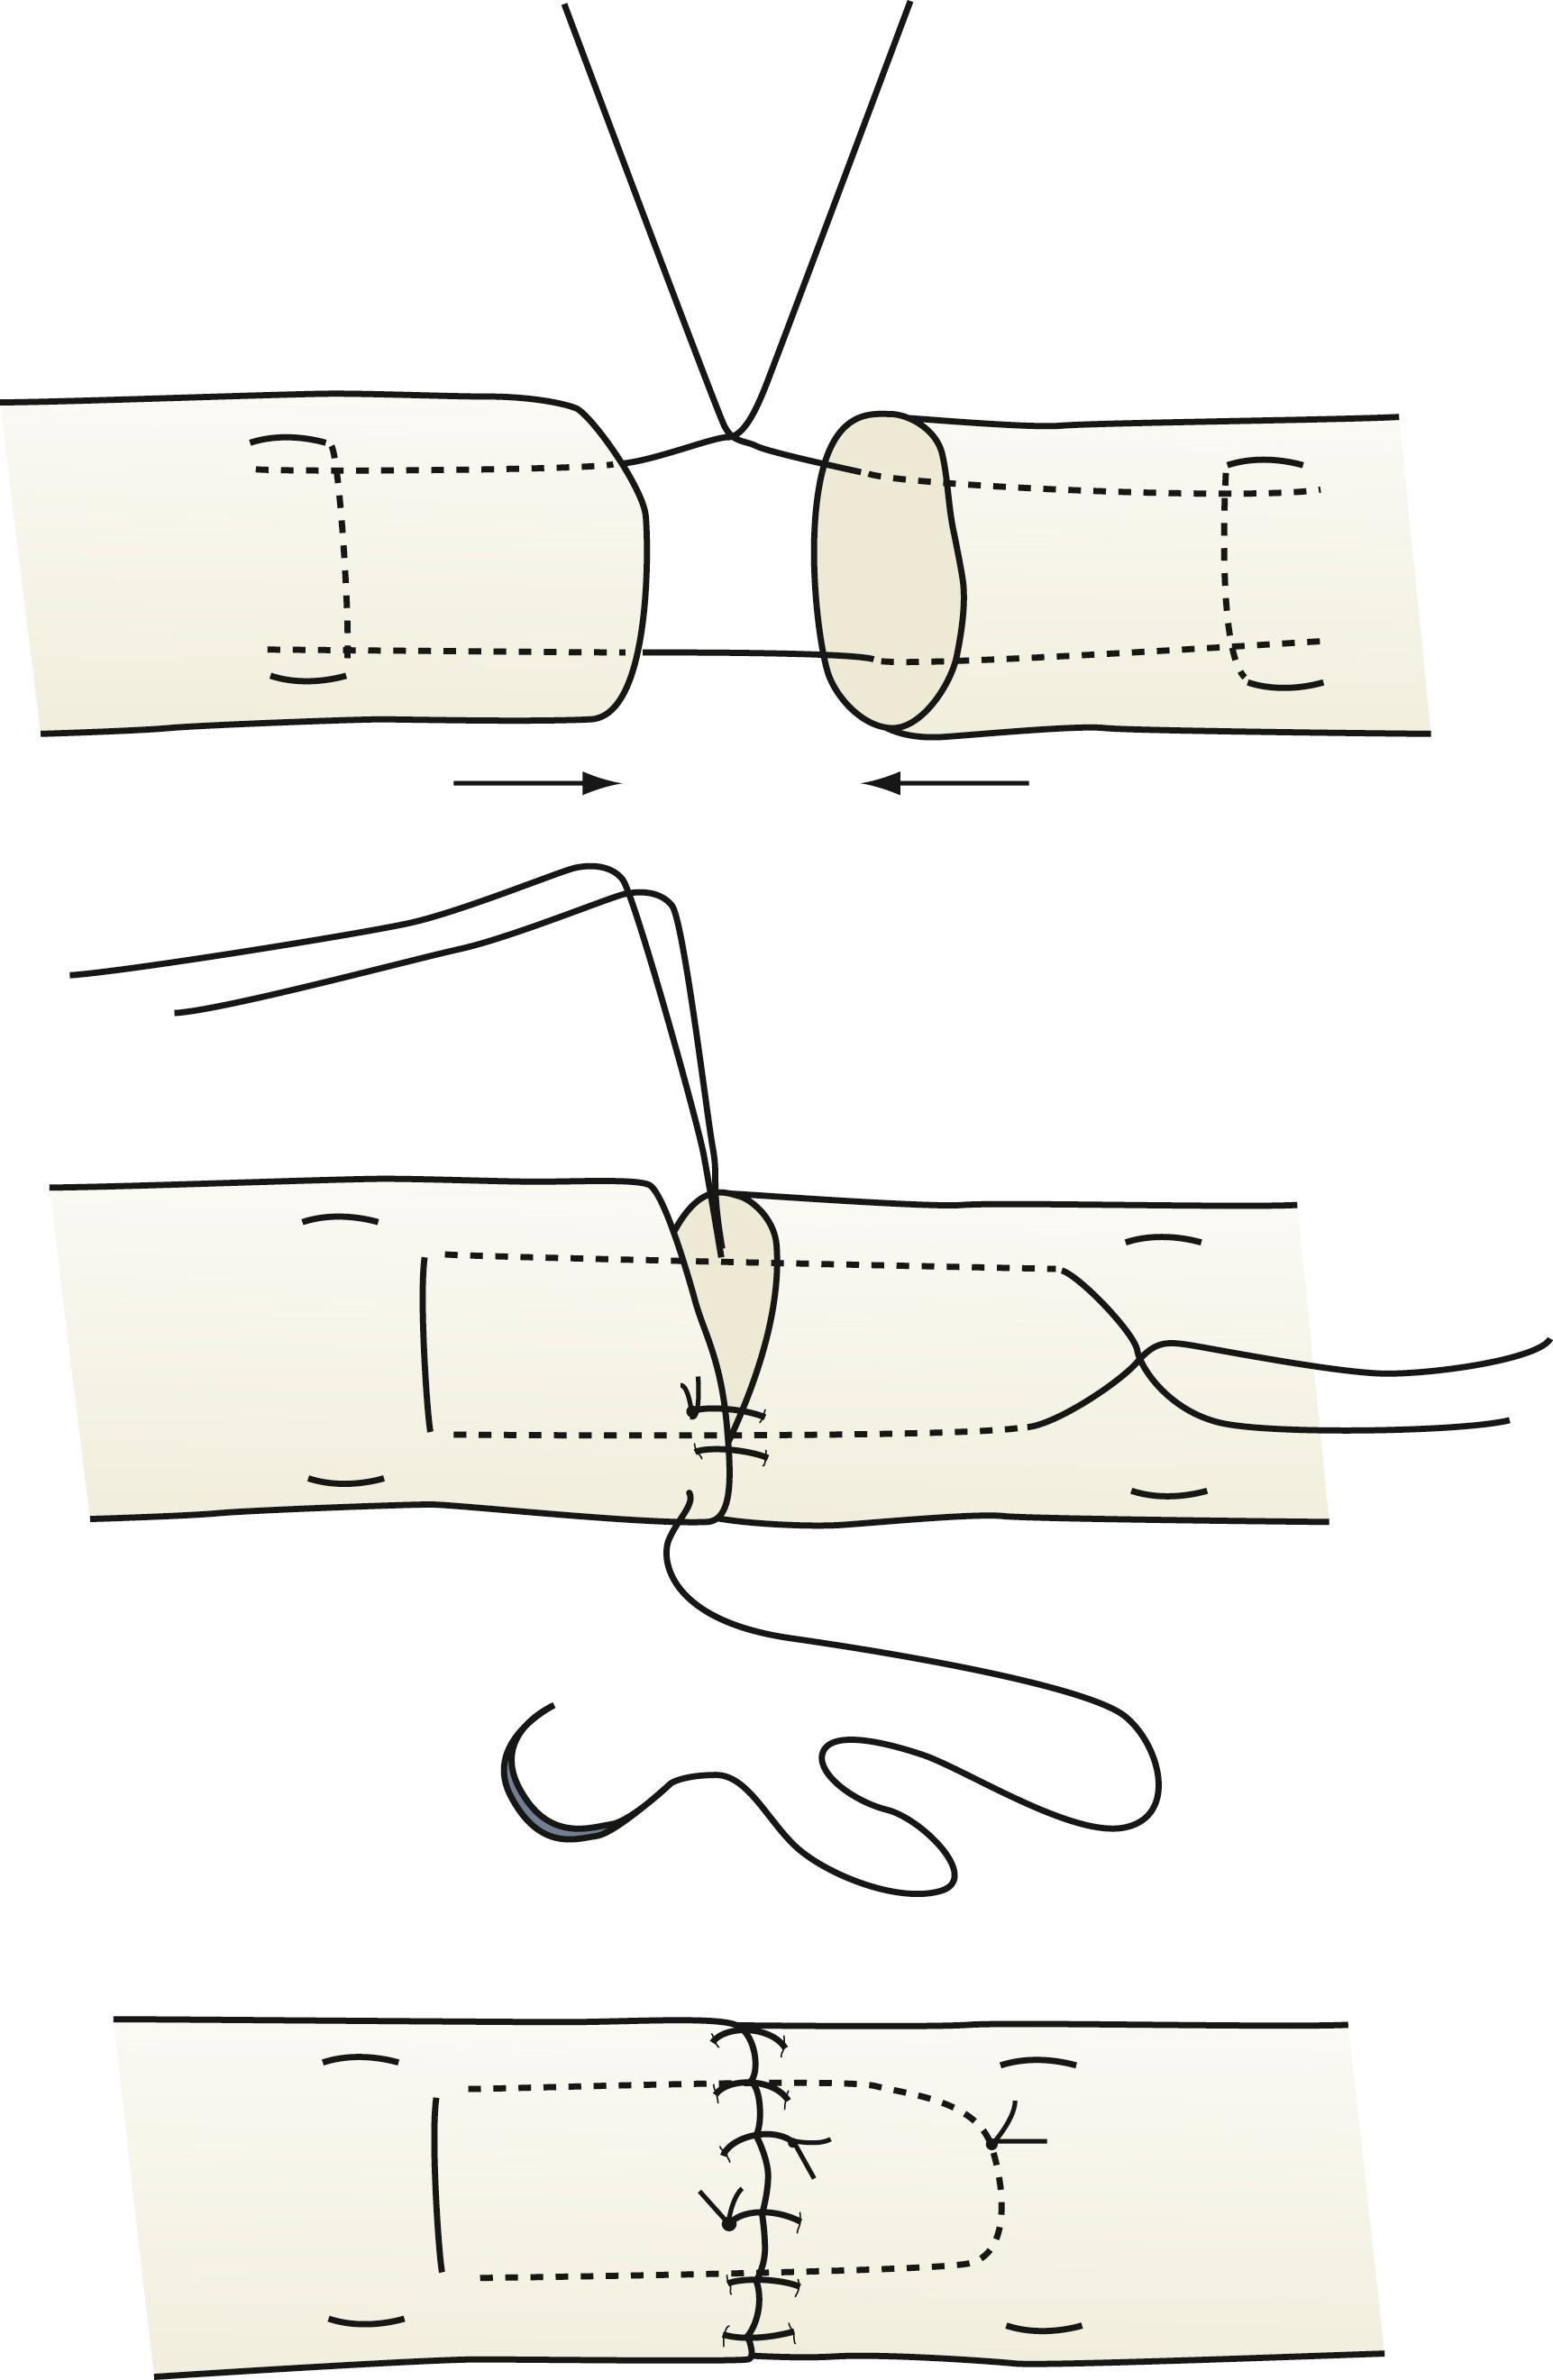 Fig. 70.22, Technique of performing a four-strand flexor tendon core suture repair is demonstrated in association with a peripheral running suture.